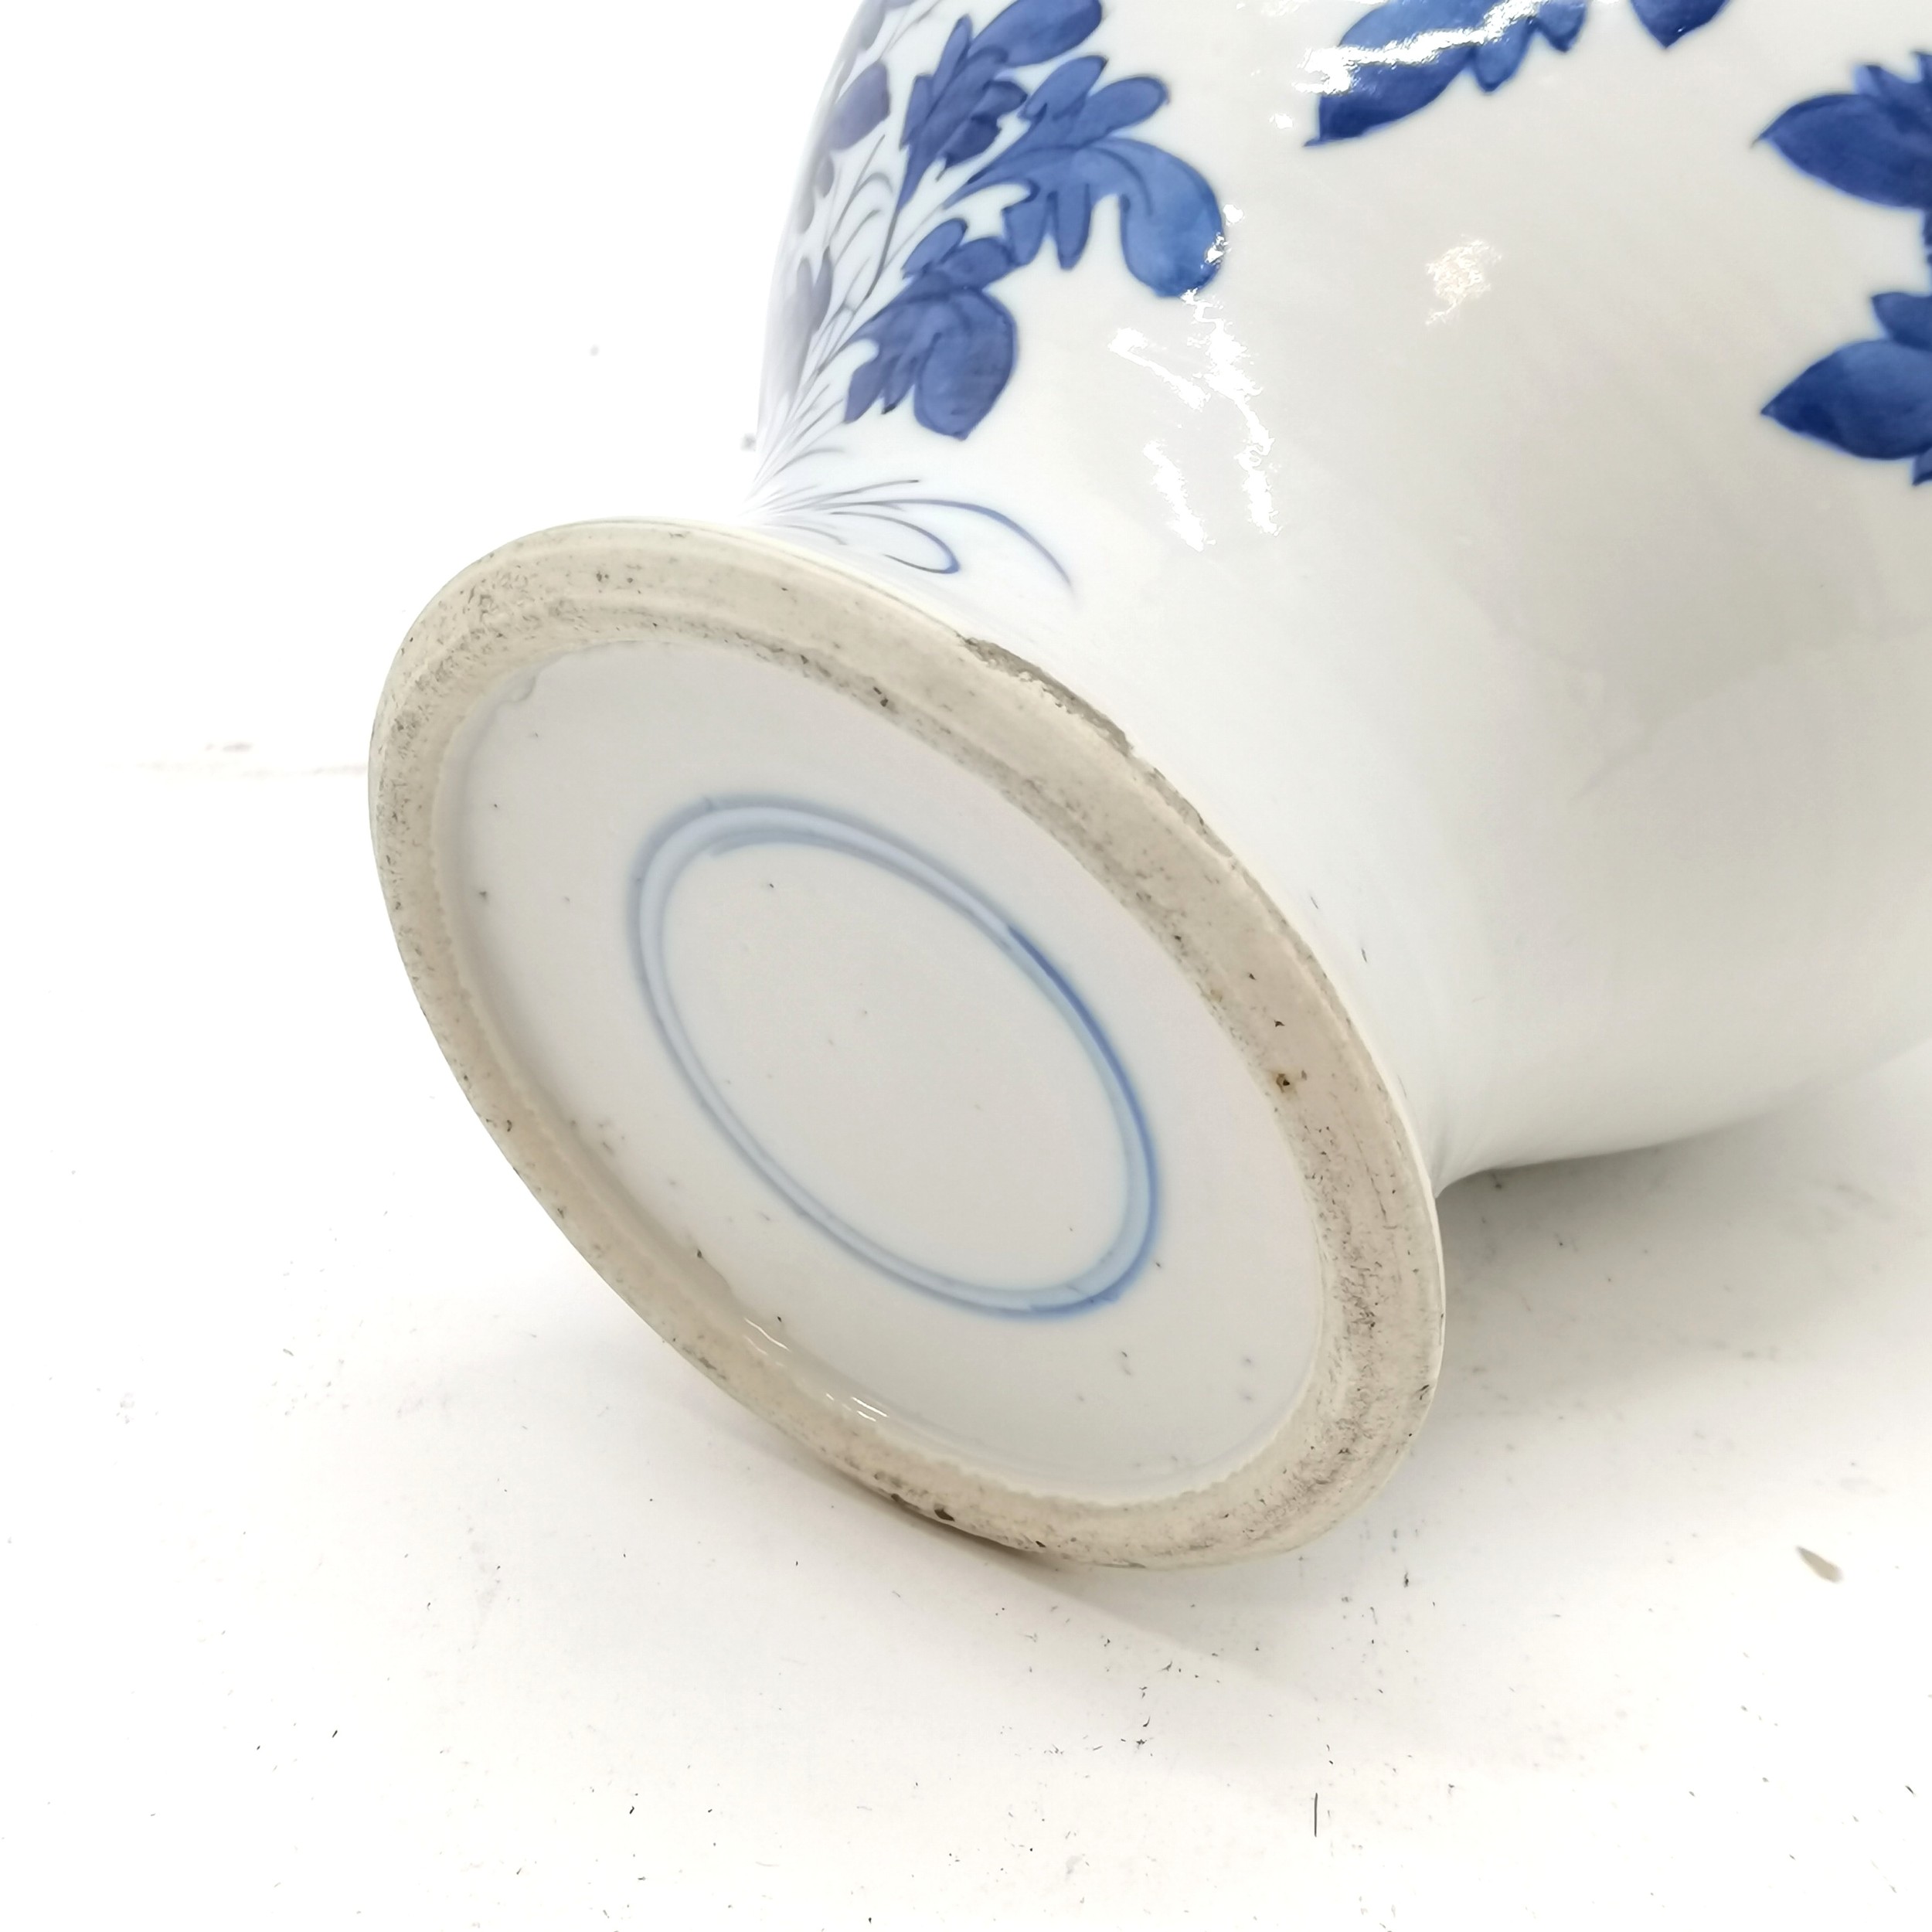 Antique Chinese blue & white decorated pot with bird / flower detail (16cm high) - has chip to rim & - Image 4 of 6